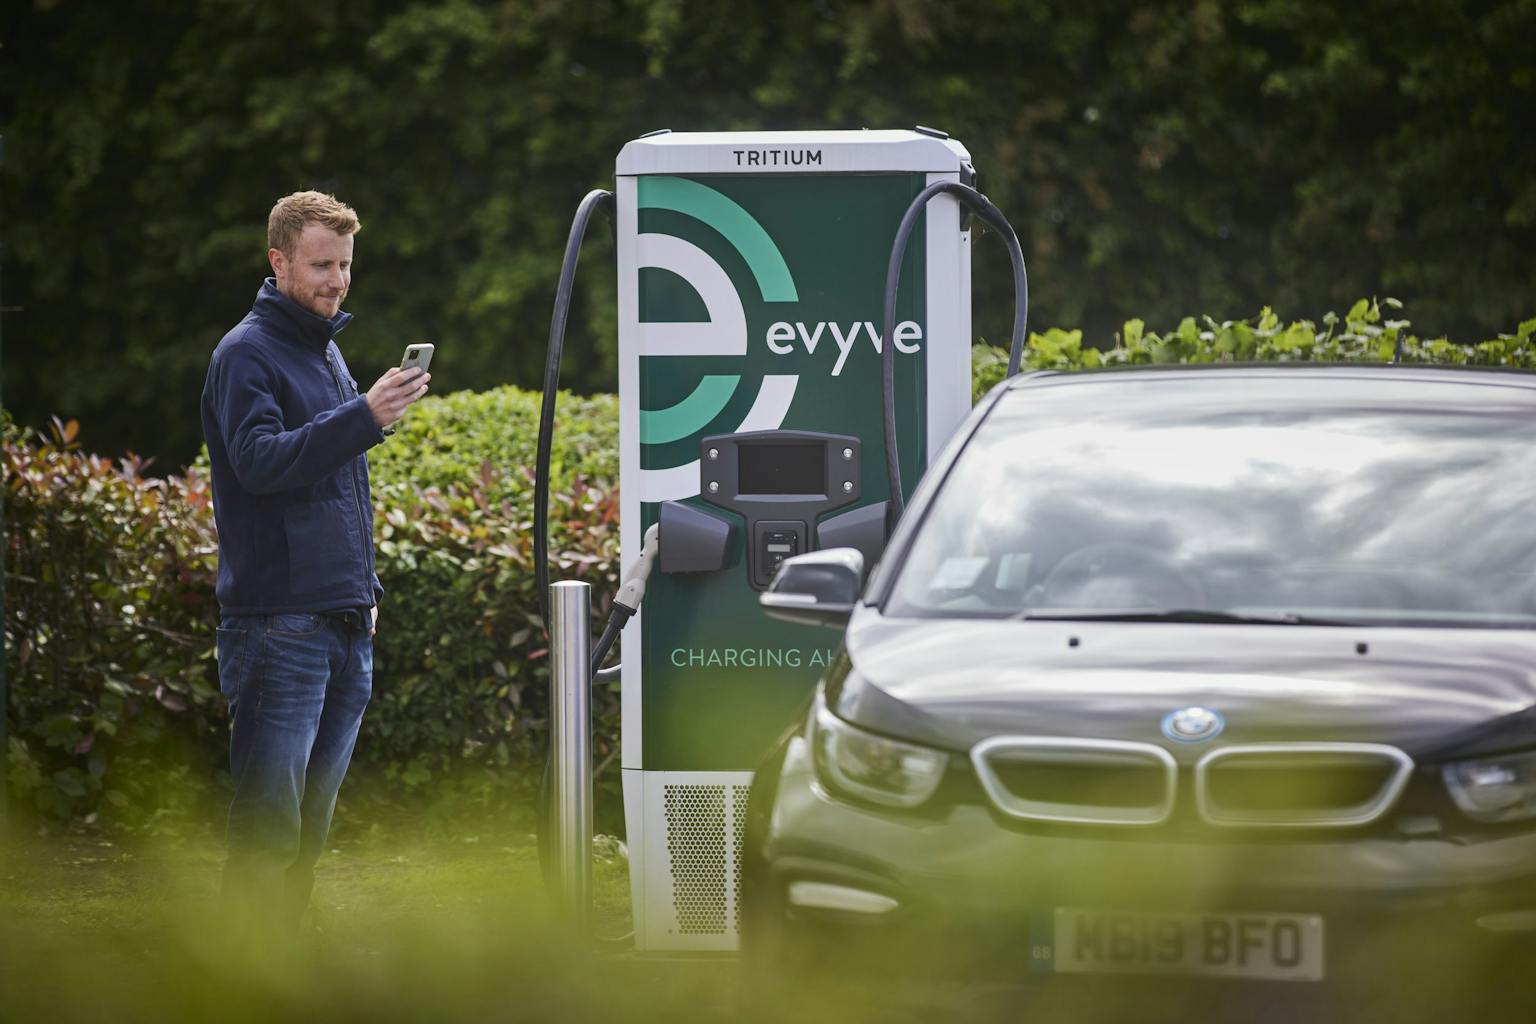 evyve ev charging station being used to charge an ev